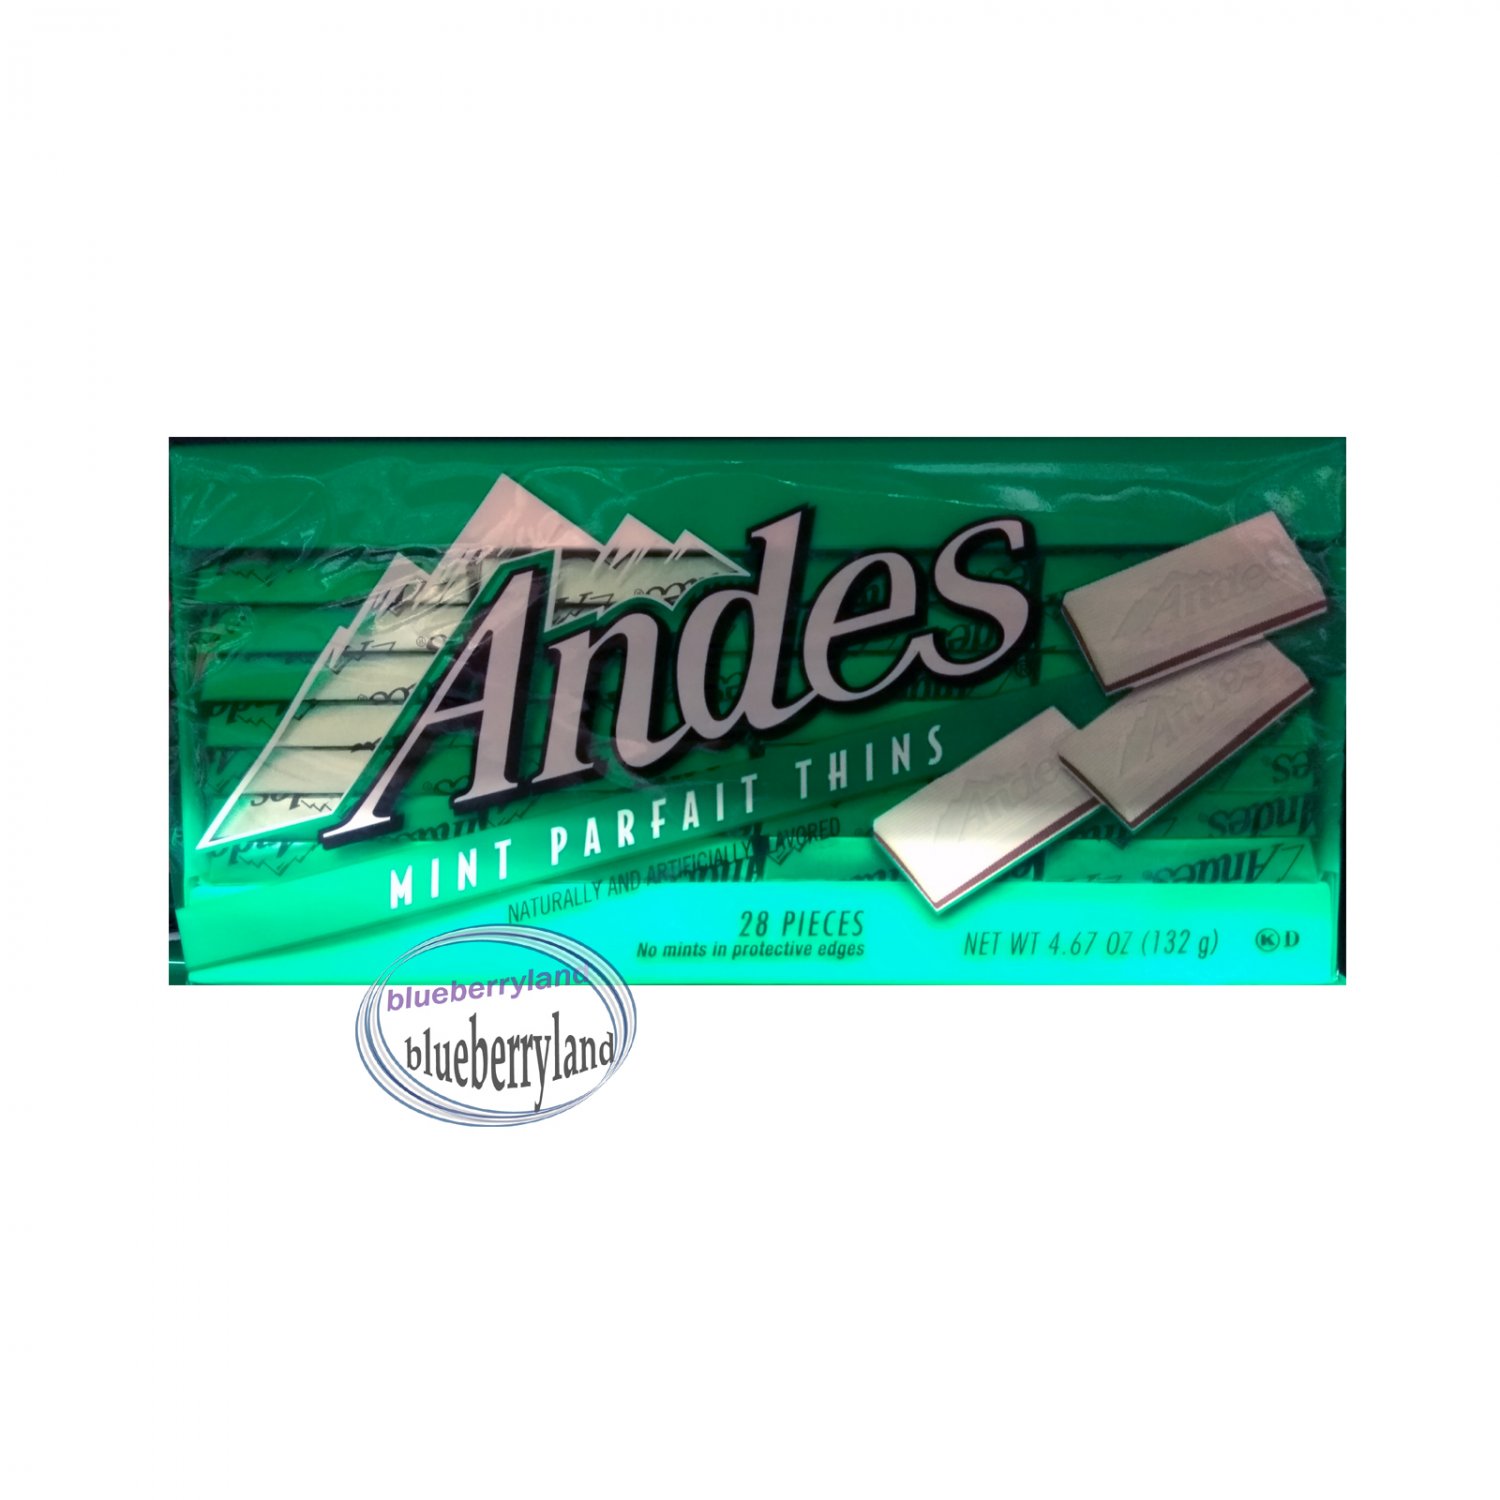 Andes Mint Parfait Thins 132g (28 Pcs) chocolate candy sweets snacks ladies